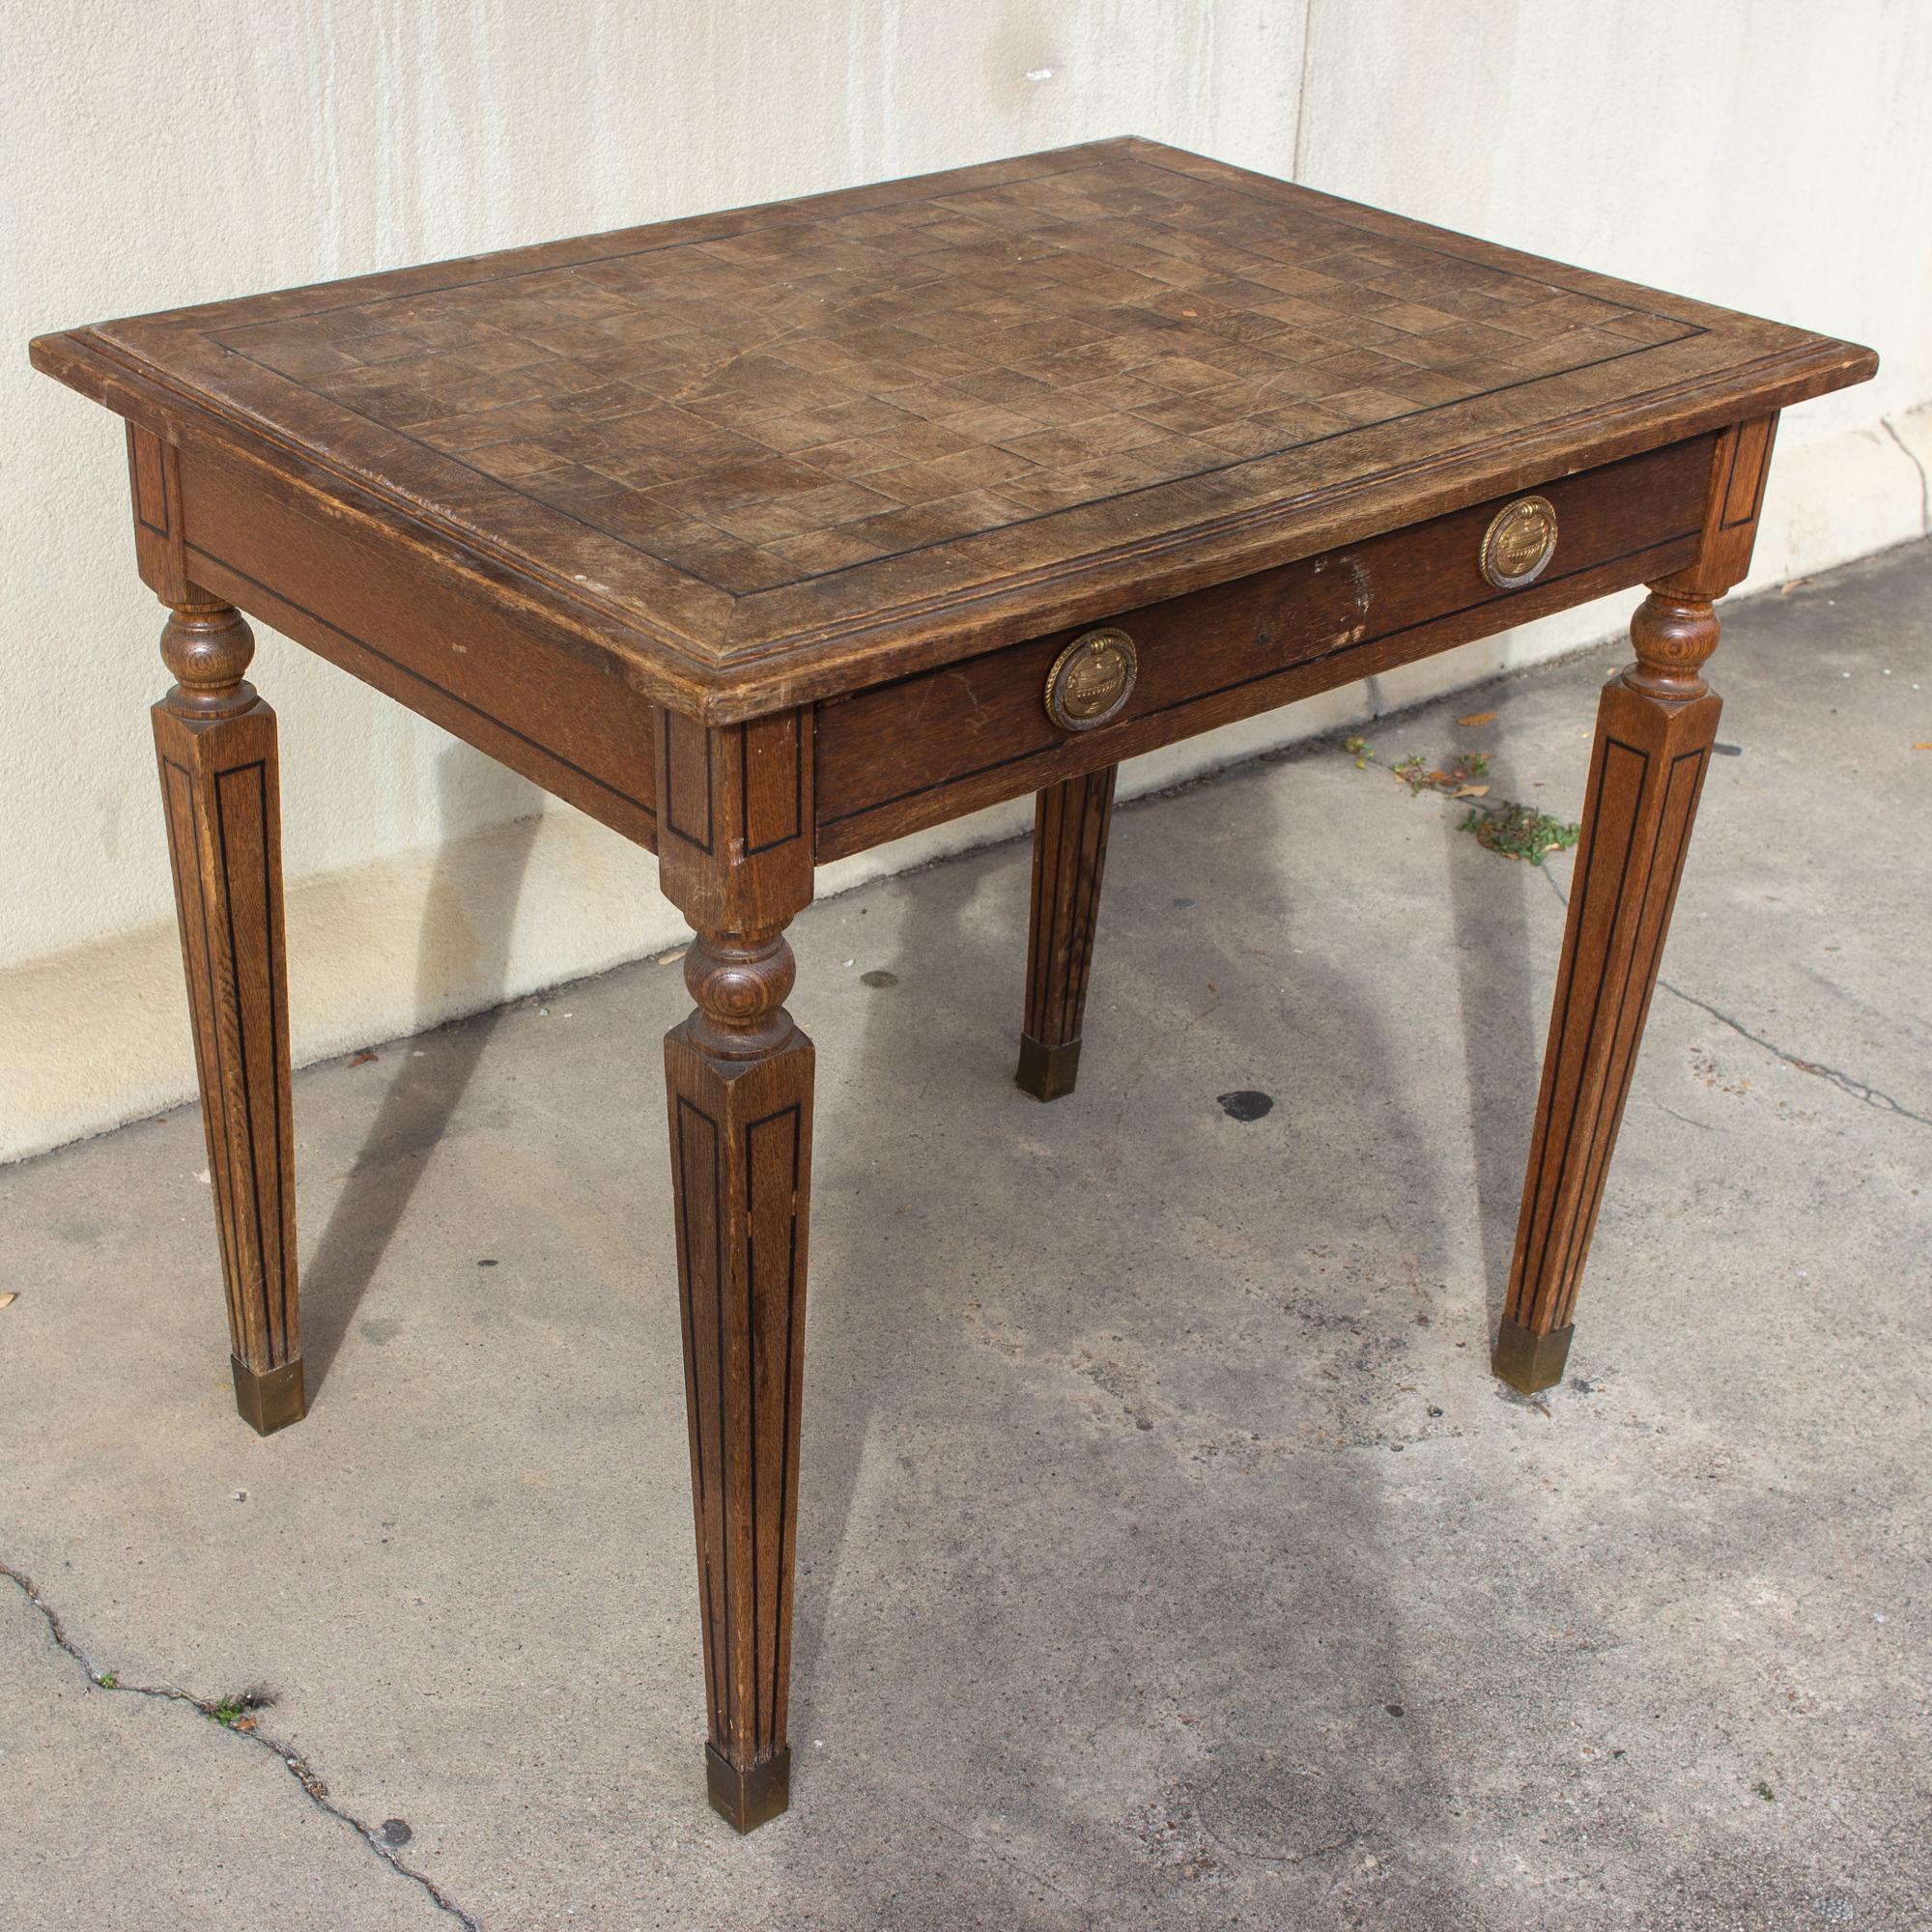 This antique French desk features a beautifully handcrafted parquet top, turned and tapered legs, pinstripe details and brass sleeved feet. It's compact size is ideal for creating a flexible work-space while still offering storage within. The drawer